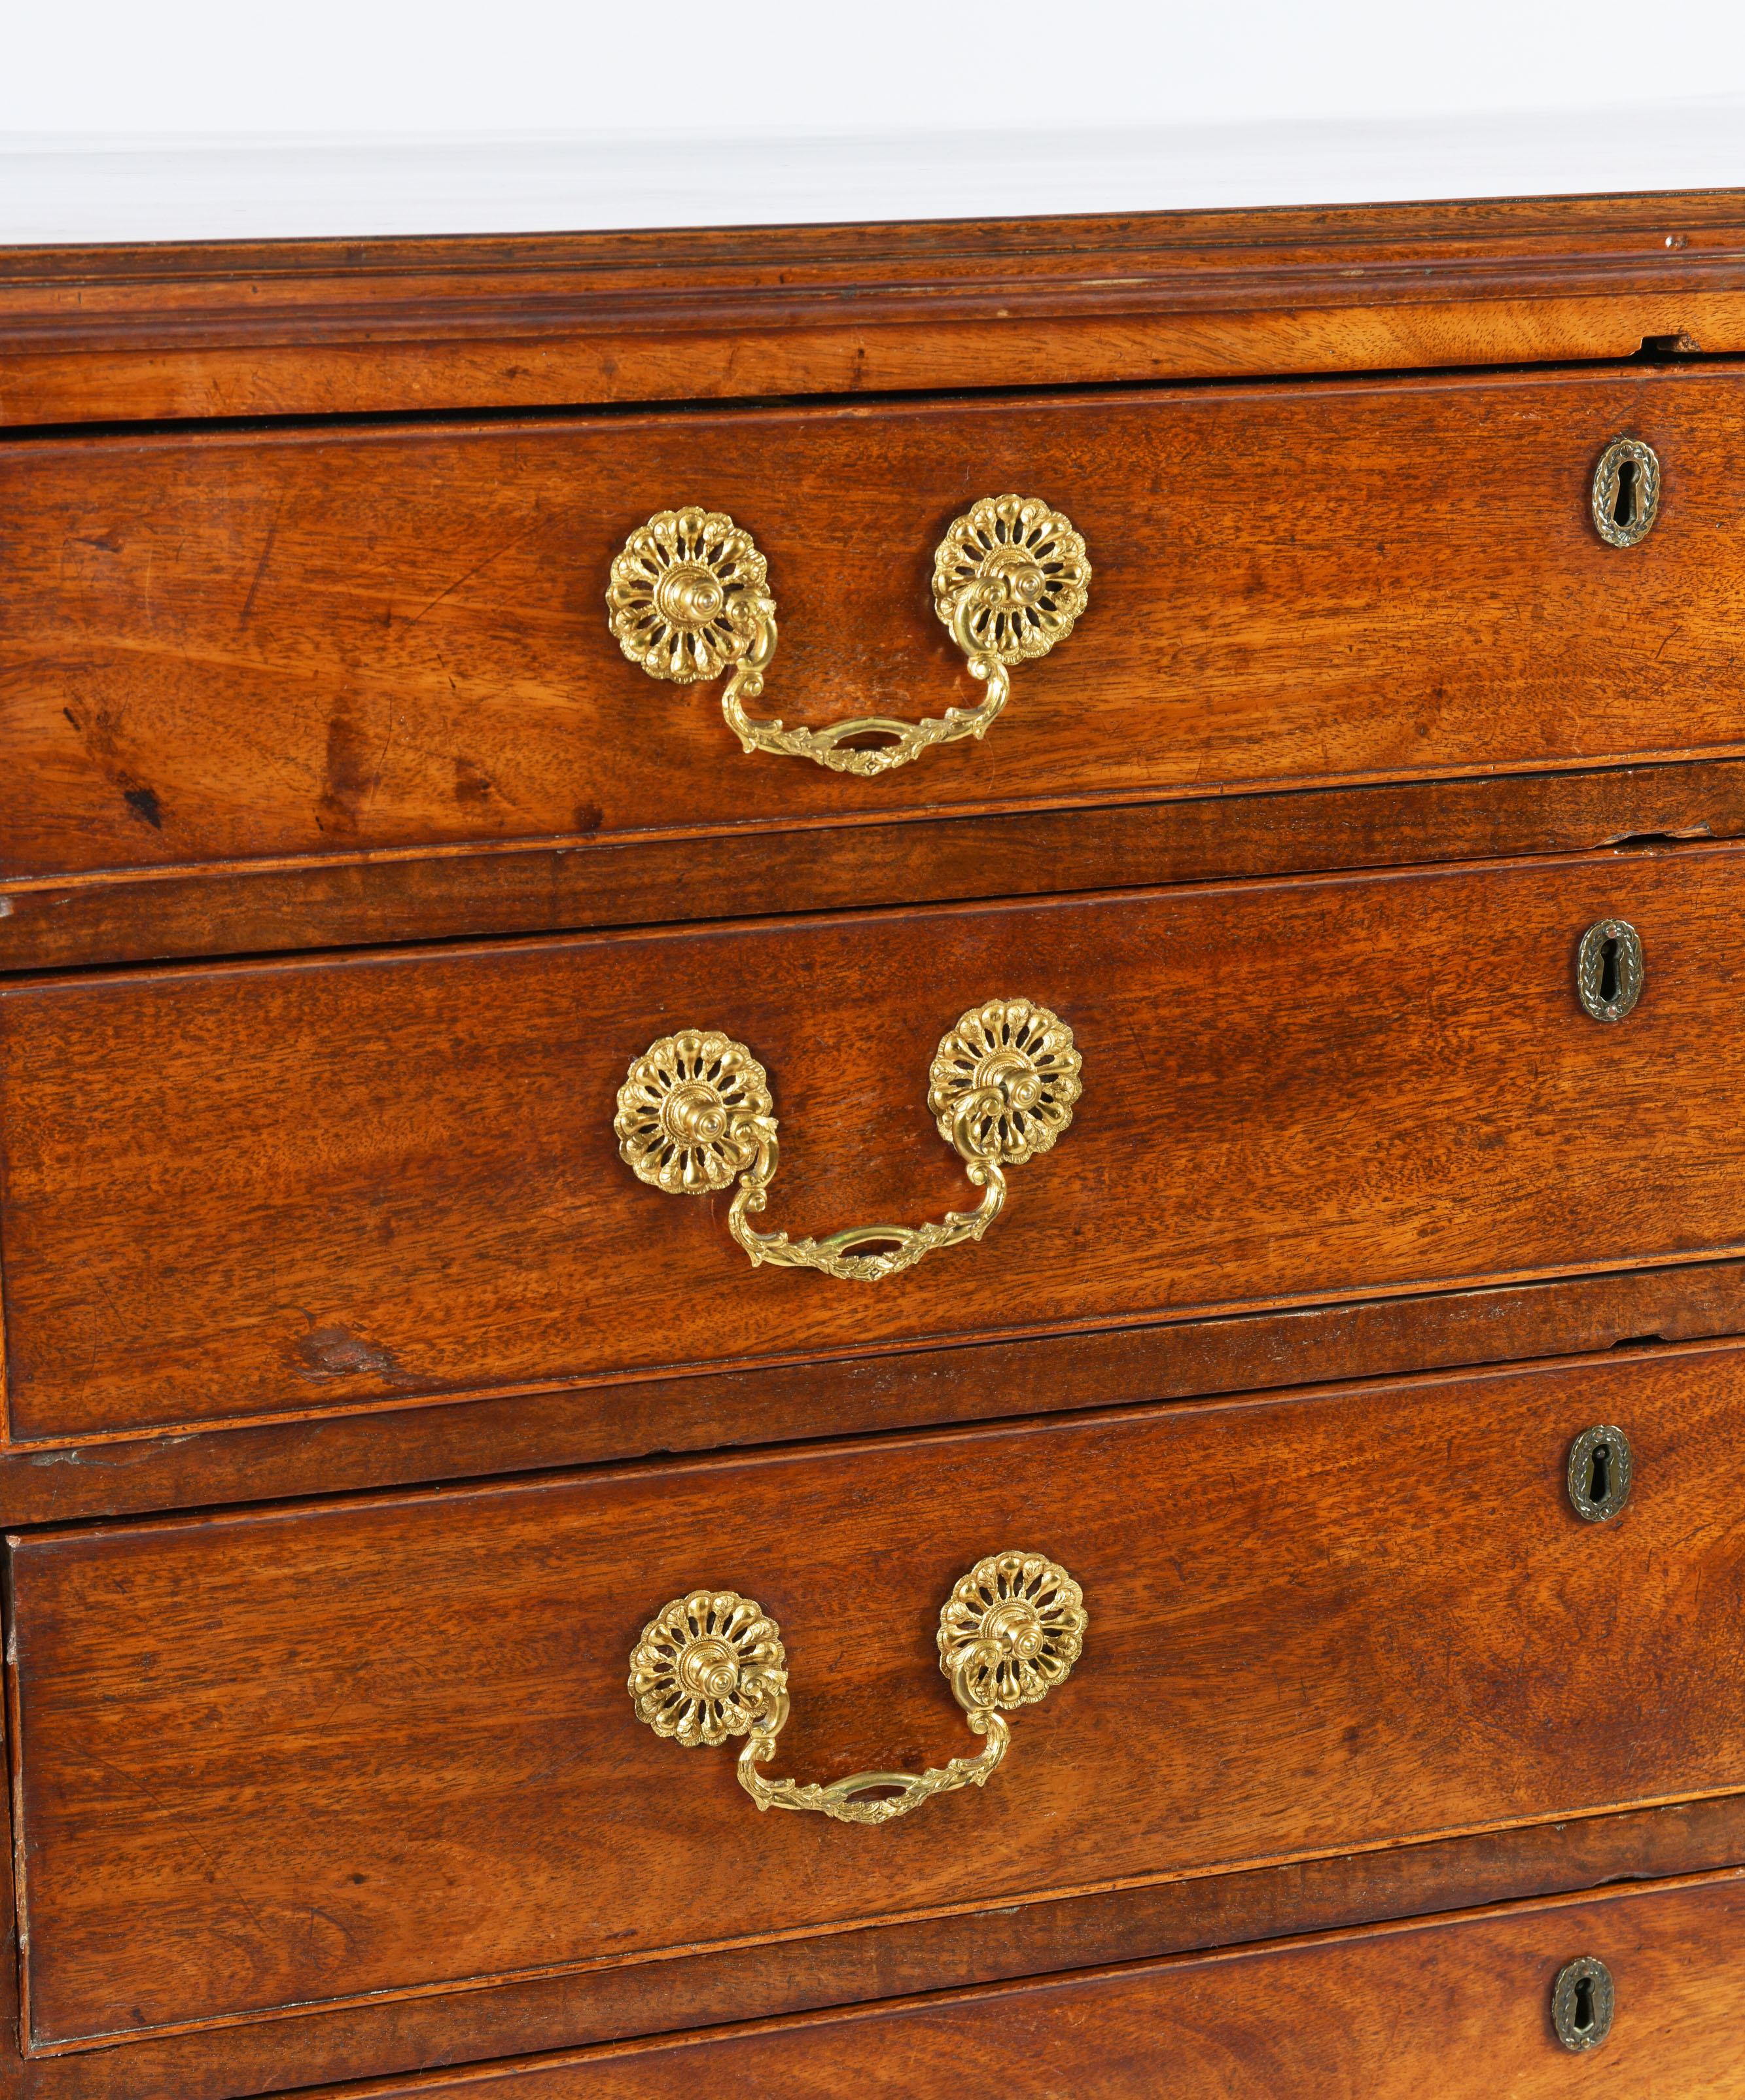 This very attractive and well-proportioned mahogany chest of drawers features 5 long graduating cock beaded drawers with the original ornate brass handles and hardware, supported on bracket feet. It measures 40 in – 101.6 cm wide, 21 ½ in – 54.6 cm